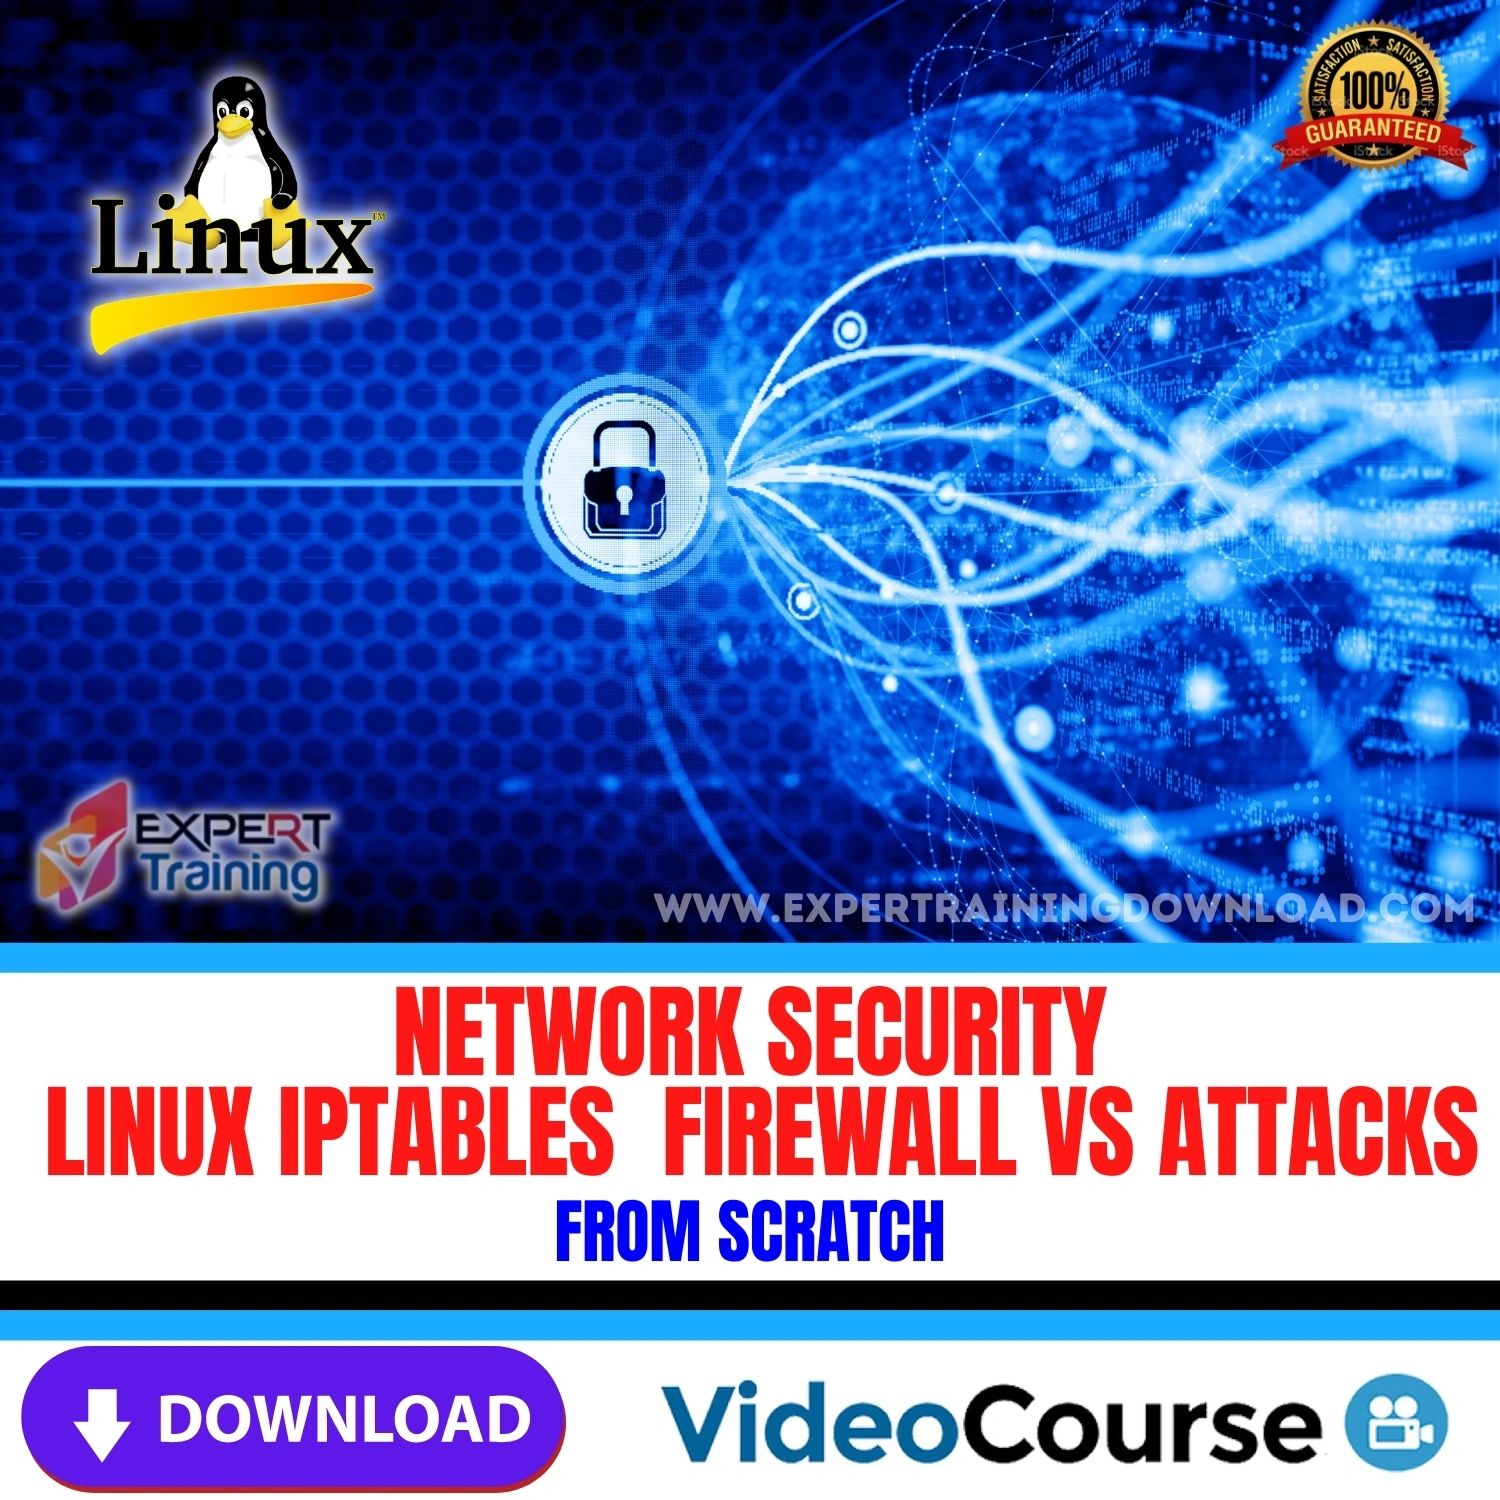 Network Security Linux Iptables Firewall Vs Attacks From Scratch